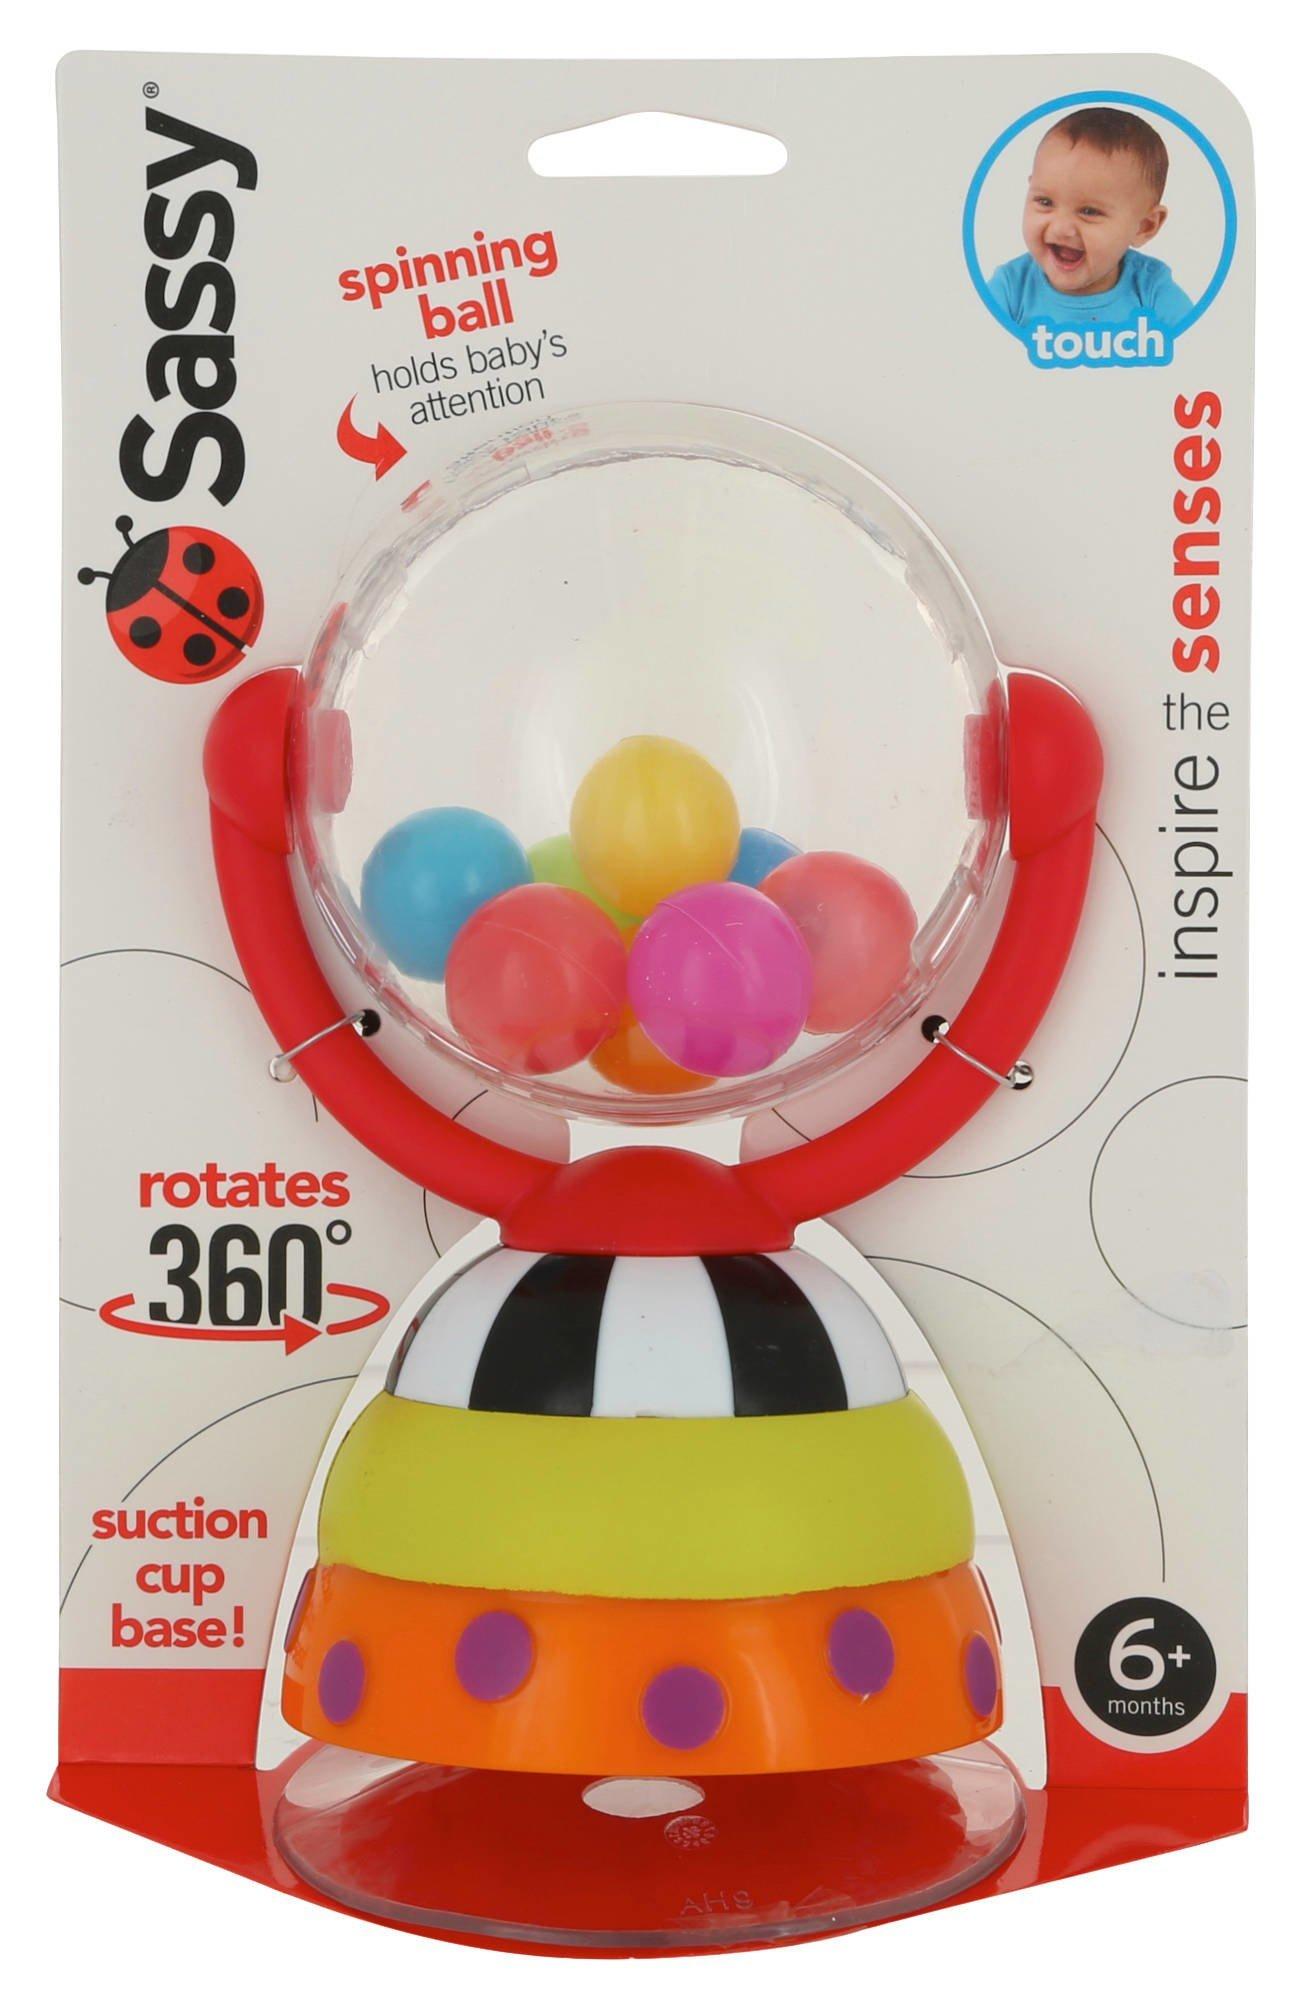 ball spinner toy